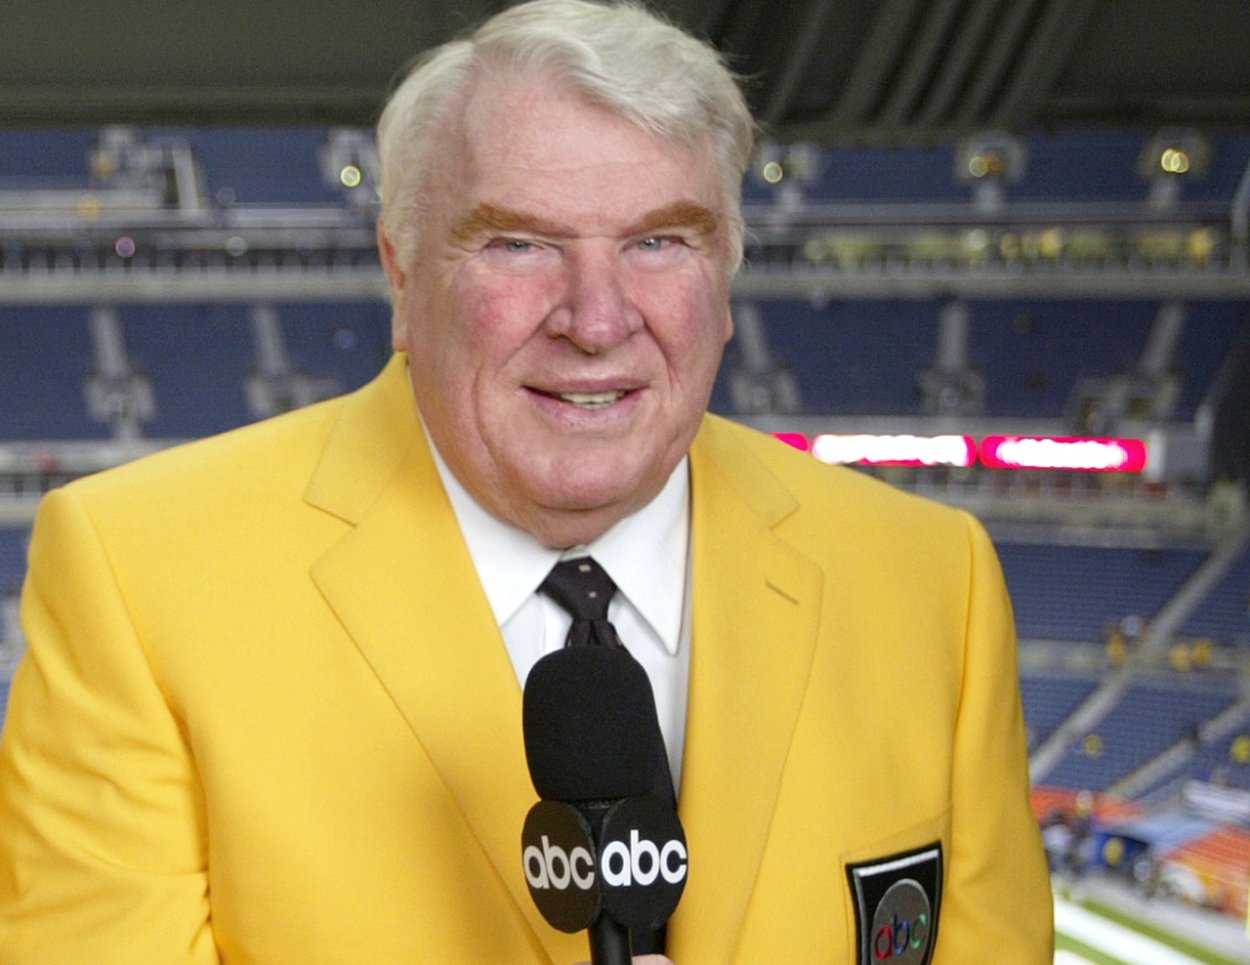 NFL legend John Madden, seen in 2002, hated calling Dallas Cowboys games.